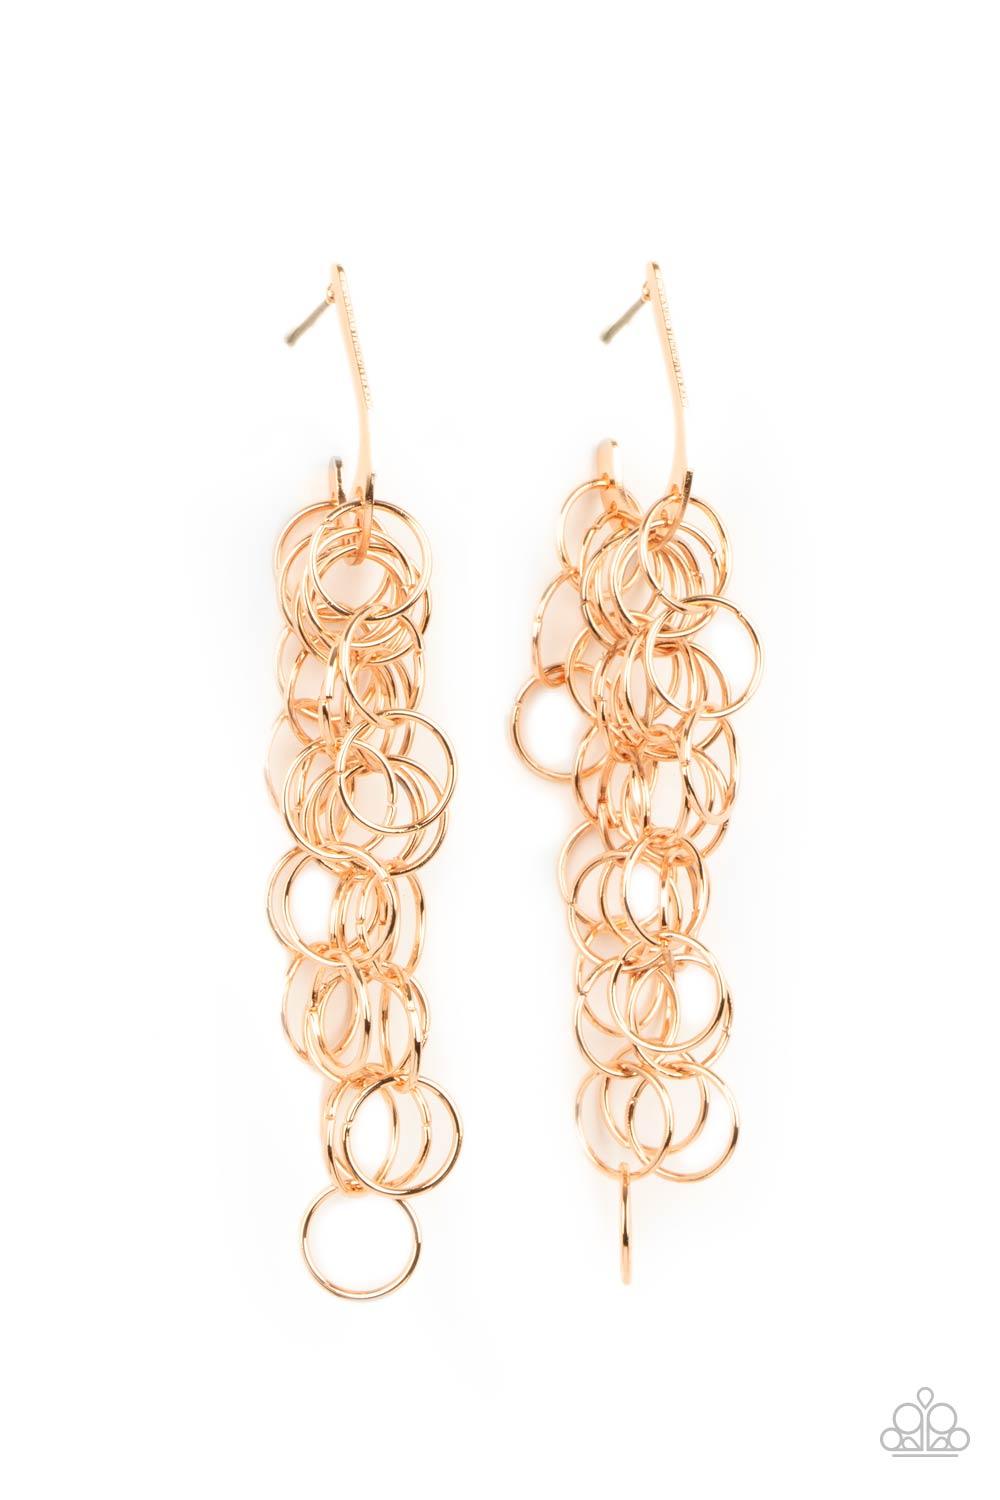 Paparazzi Accessories Long Live The Rebels - Gold Strands of shiny gold links cascade from the bottom of a dainty hook shaped hoop, creating a rebellious fringe. Hoop measures approximately 1/2" in diameter. Earring attaches to a standard post fitting. So